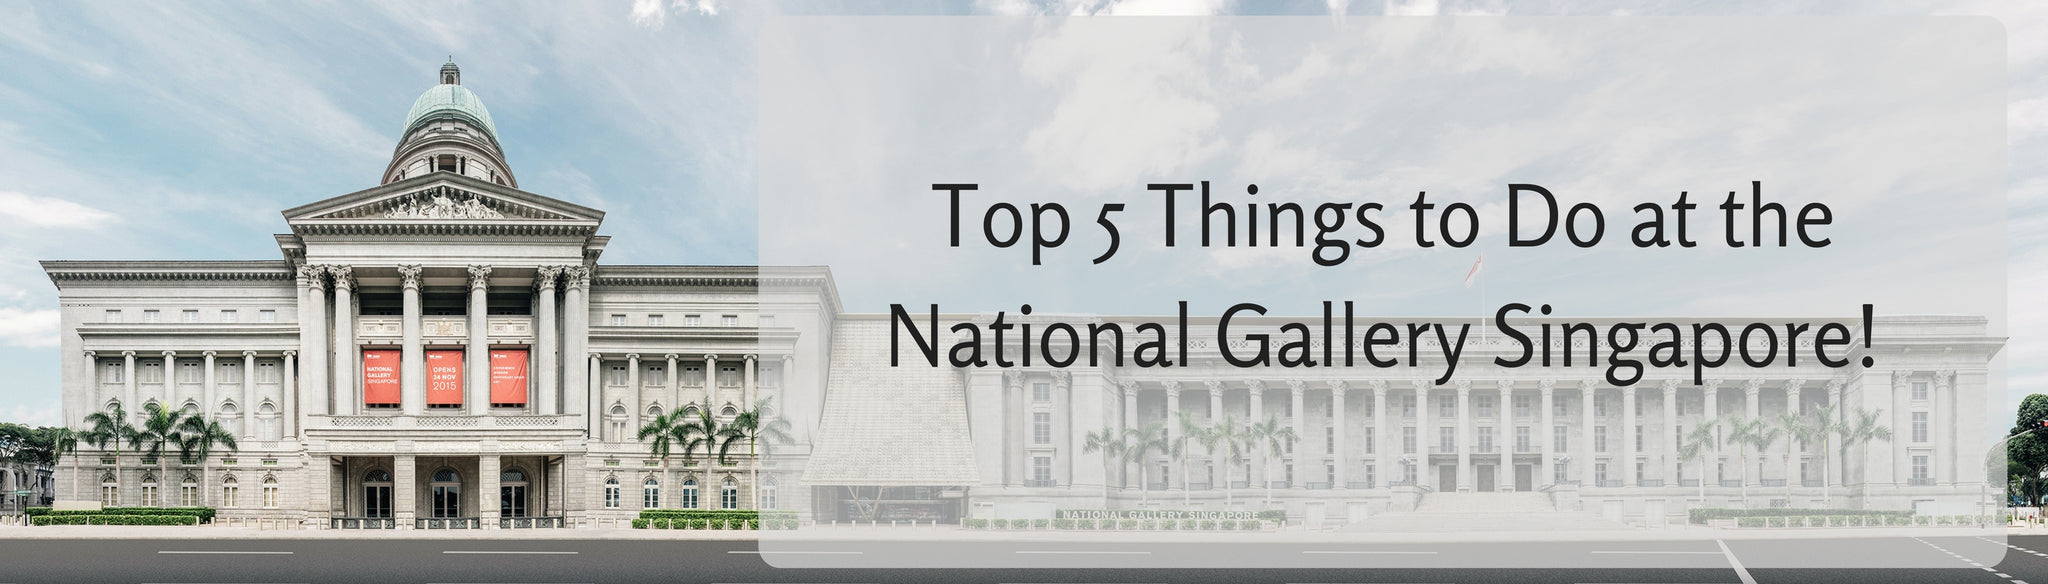 Things to do this Weekend: Top 5 Things to Do With Your LOs @ The National Gallery Singapore!